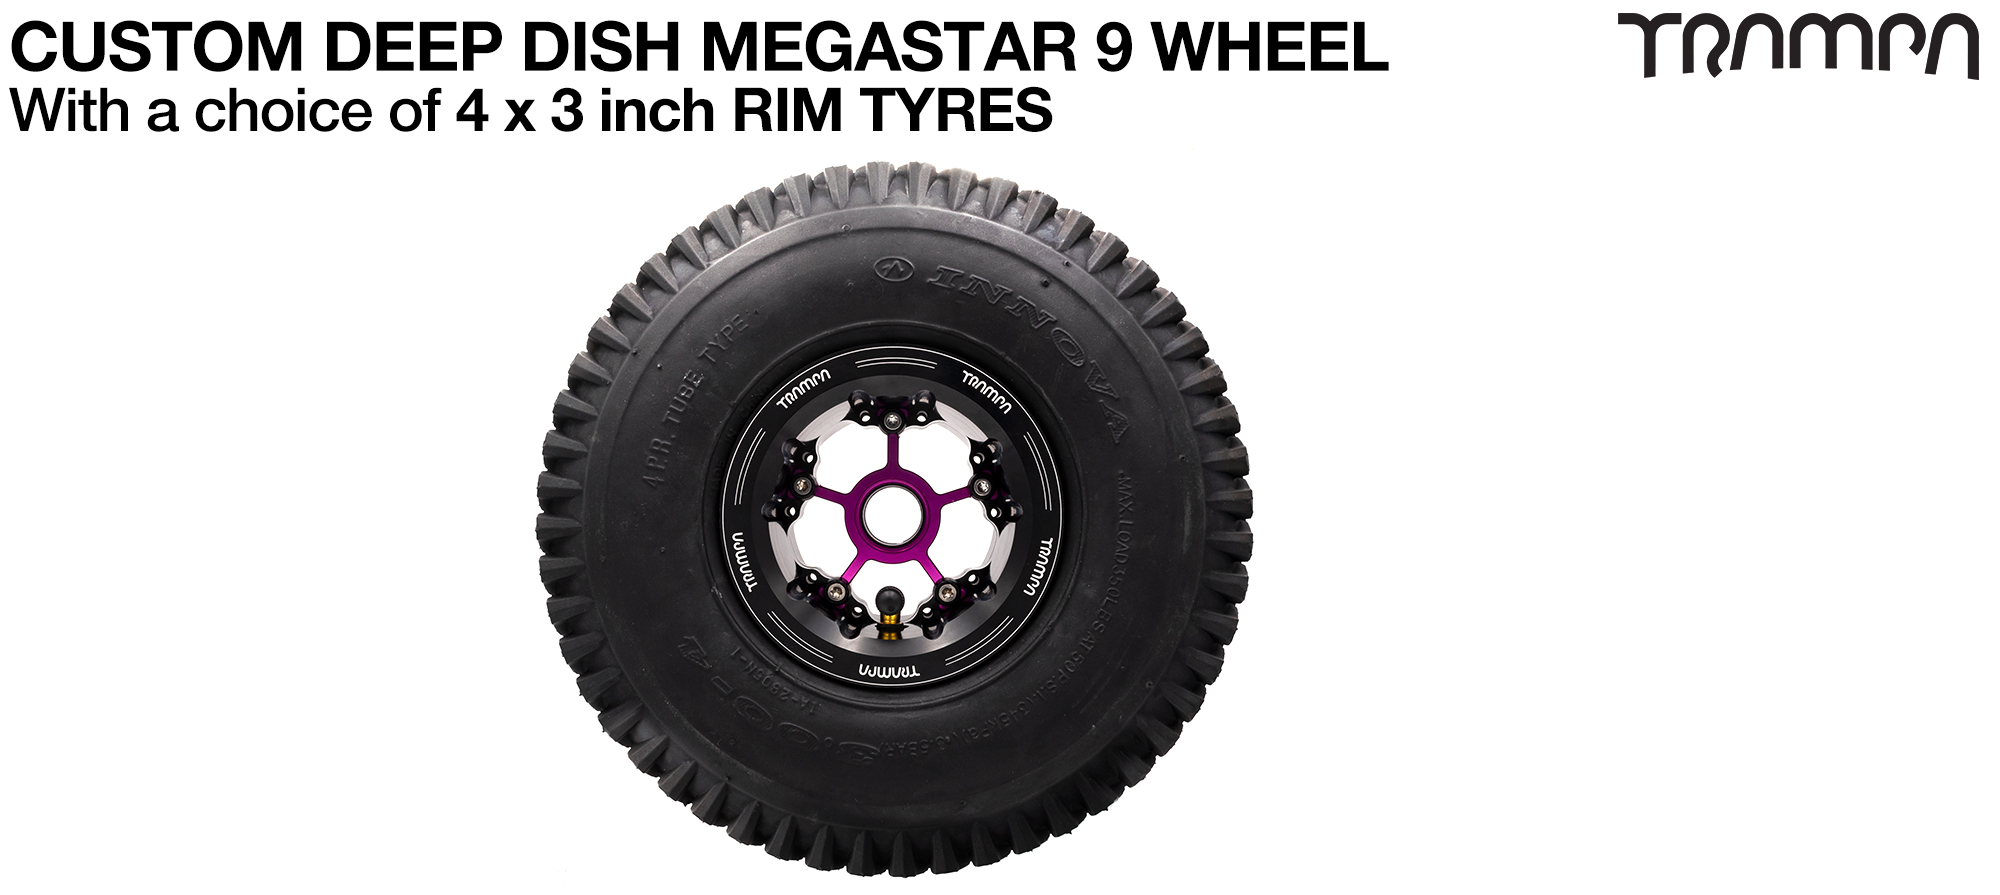 TRAMPA's DEEP-DISH MEGASTAR 9 wheels are of your dreams!! With or without BBStar spokes any combination possible & fits up to 10 inch tyres too!